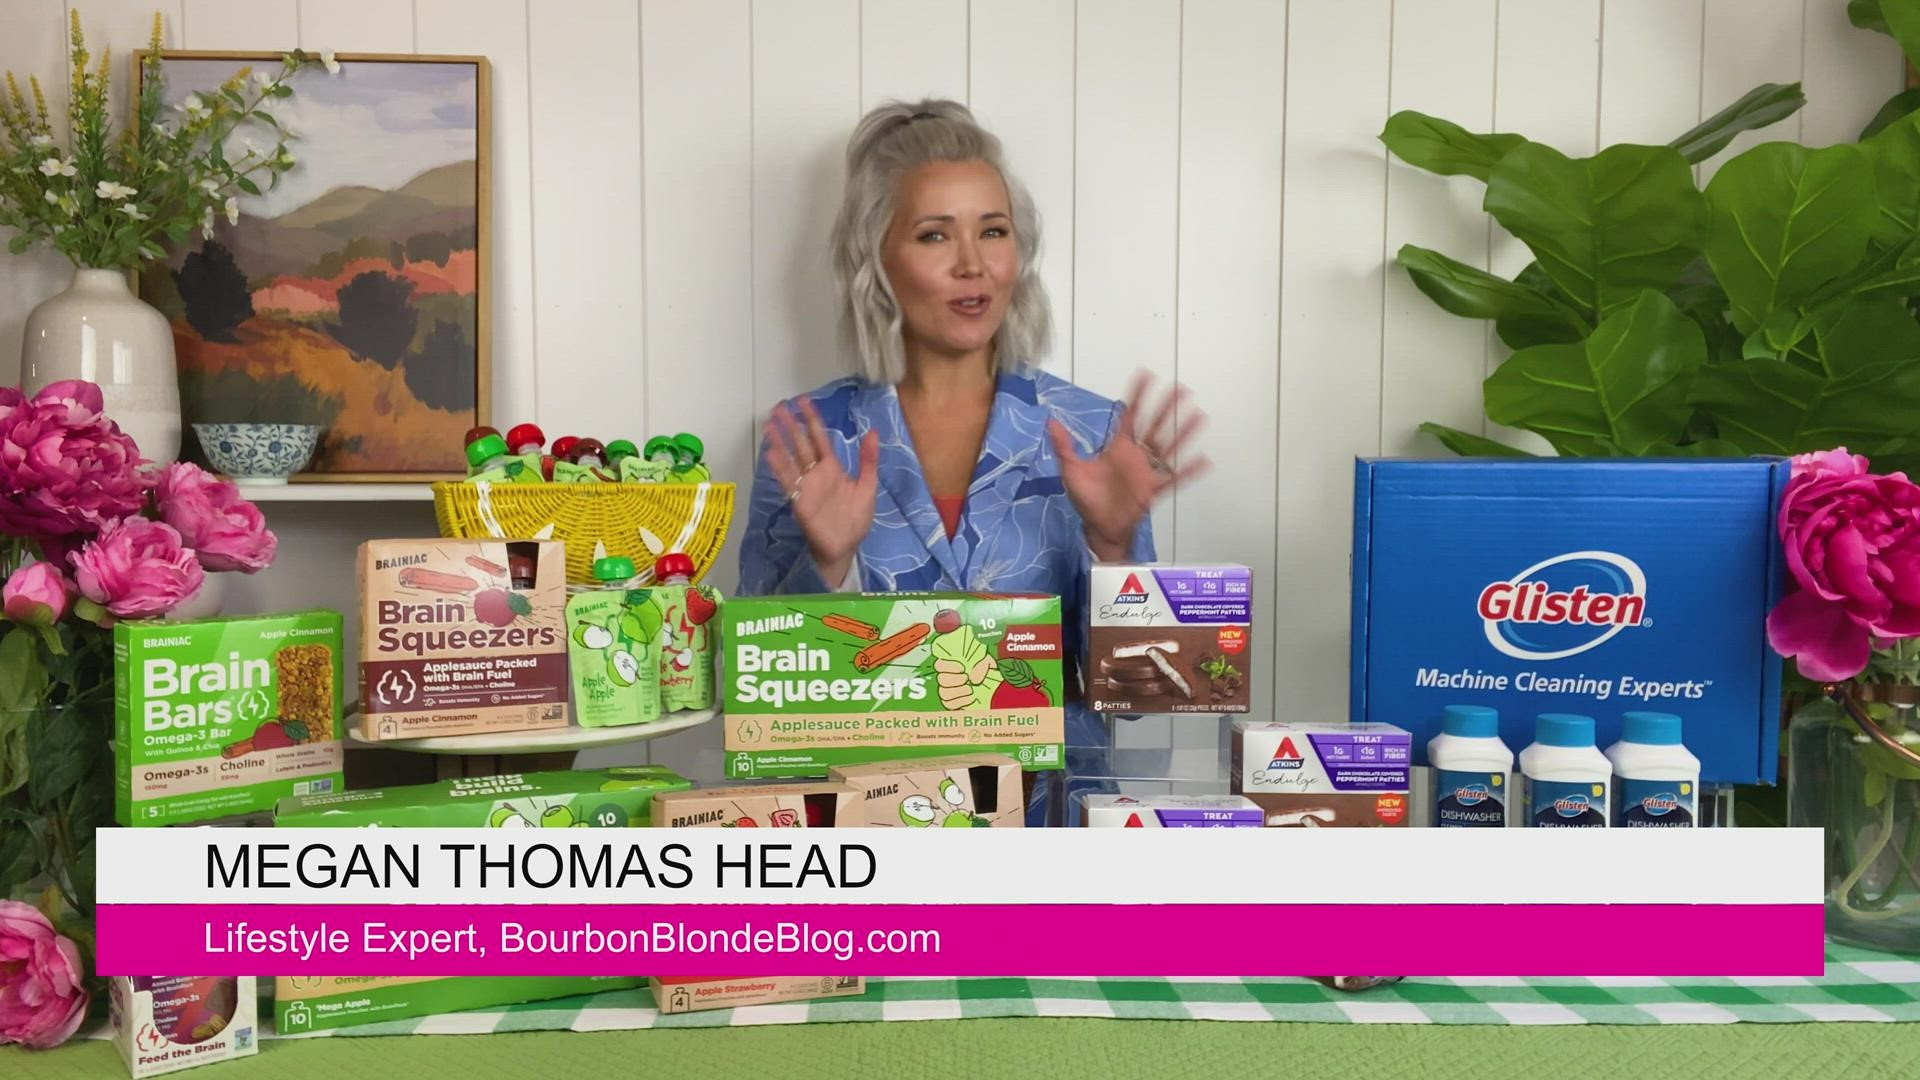 Lifestyle Expert Megan Thomas Head shares three ideas to make your next summer get-together a success